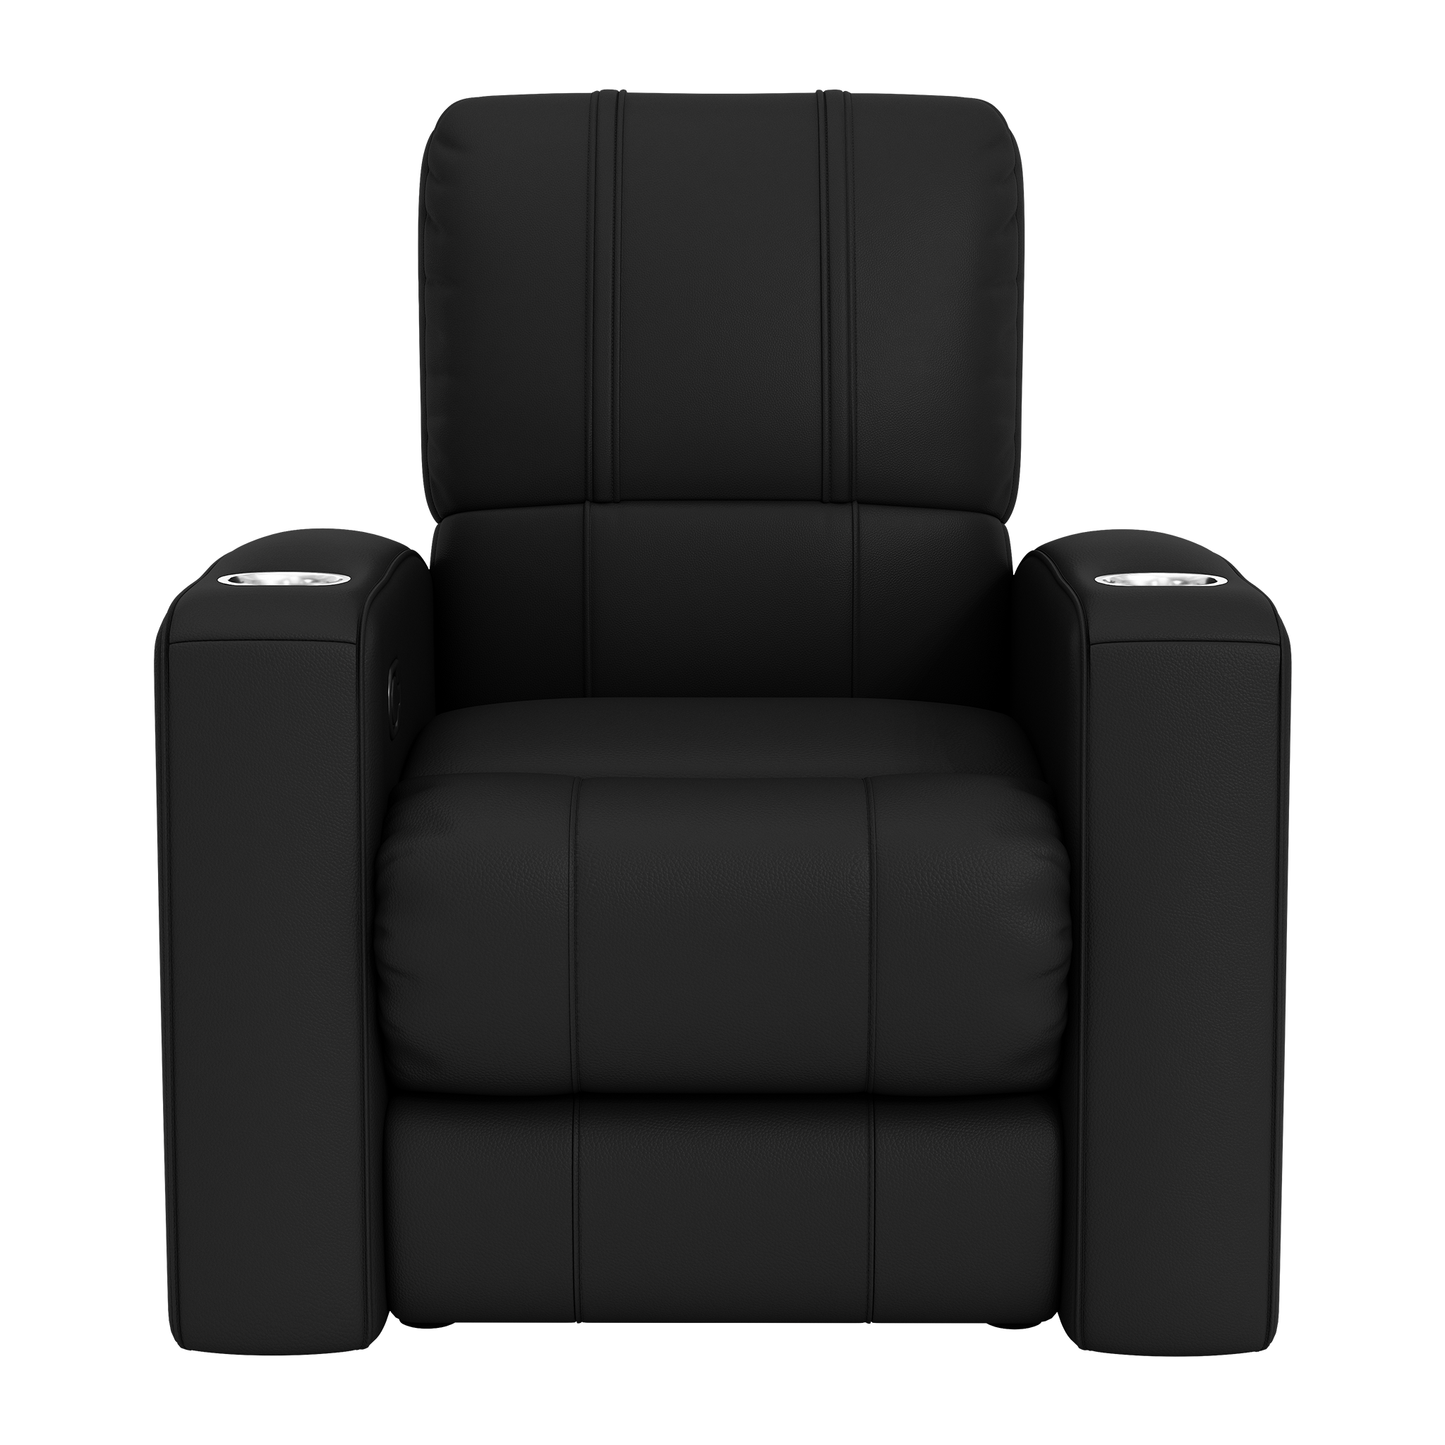 Relax Home Theater Recliner with Tampa University Primary Logo